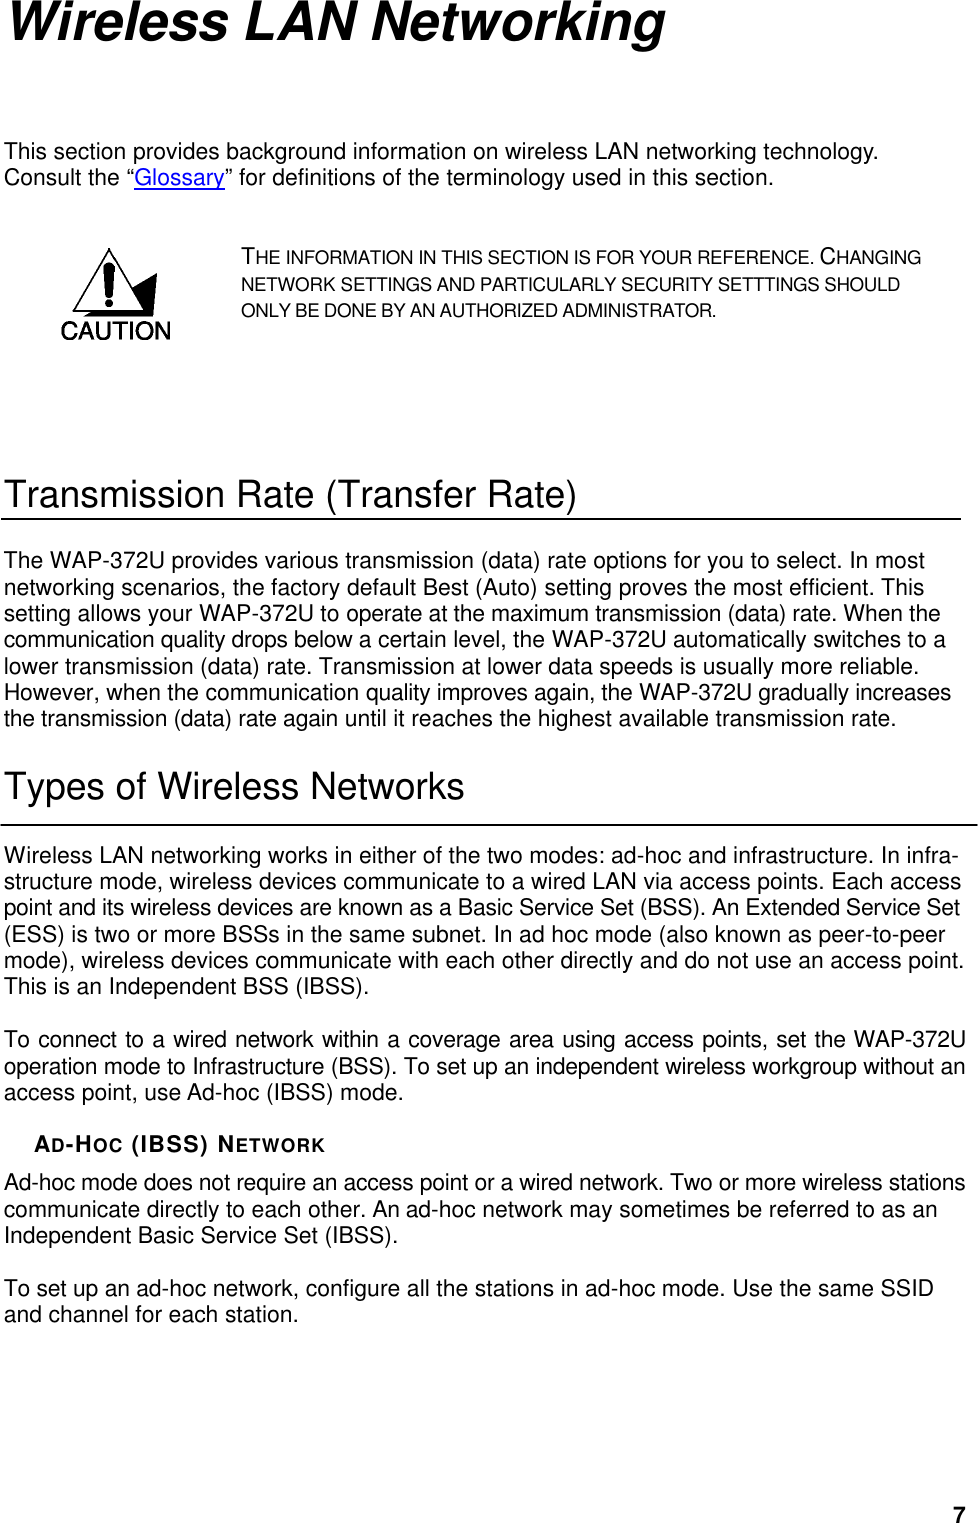  7Wireless LAN Networking This section provides background information on wireless LAN networking technology. Consult the “Glossary” for definitions of the terminology used in this section. THE INFORMATION IN THIS SECTION IS FOR YOUR REFERENCE. CHANGING NETWORK SETTINGS AND PARTICULARLY SECURITY SETTTINGS SHOULD ONLY BE DONE BY AN AUTHORIZED ADMINISTRATOR.   Transmission Rate (Transfer Rate) The WAP-372U provides various transmission (data) rate options for you to select. In most networking scenarios, the factory default Best (Auto) setting proves the most efficient. This setting allows your WAP-372U to operate at the maximum transmission (data) rate. When the communication quality drops below a certain level, the WAP-372U automatically switches to a lower transmission (data) rate. Transmission at lower data speeds is usually more reliable. However, when the communication quality improves again, the WAP-372U gradually increases the transmission (data) rate again until it reaches the highest available transmission rate. Types of Wireless Networks Wireless LAN networking works in either of the two modes: ad-hoc and infrastructure. In infra-structure mode, wireless devices communicate to a wired LAN via access points. Each access point and its wireless devices are known as a Basic Service Set (BSS). An Extended Service Set (ESS) is two or more BSSs in the same subnet. In ad hoc mode (also known as peer-to-peer mode), wireless devices communicate with each other directly and do not use an access point. This is an Independent BSS (IBSS).  To connect to a wired network within a coverage area using access points, set the WAP-372U operation mode to Infrastructure (BSS). To set up an independent wireless workgroup without an access point, use Ad-hoc (IBSS) mode.  AD-HOC (IBSS) NETWORK Ad-hoc mode does not require an access point or a wired network. Two or more wireless stations communicate directly to each other. An ad-hoc network may sometimes be referred to as an Independent Basic Service Set (IBSS).  To set up an ad-hoc network, configure all the stations in ad-hoc mode. Use the same SSID and channel for each station.  